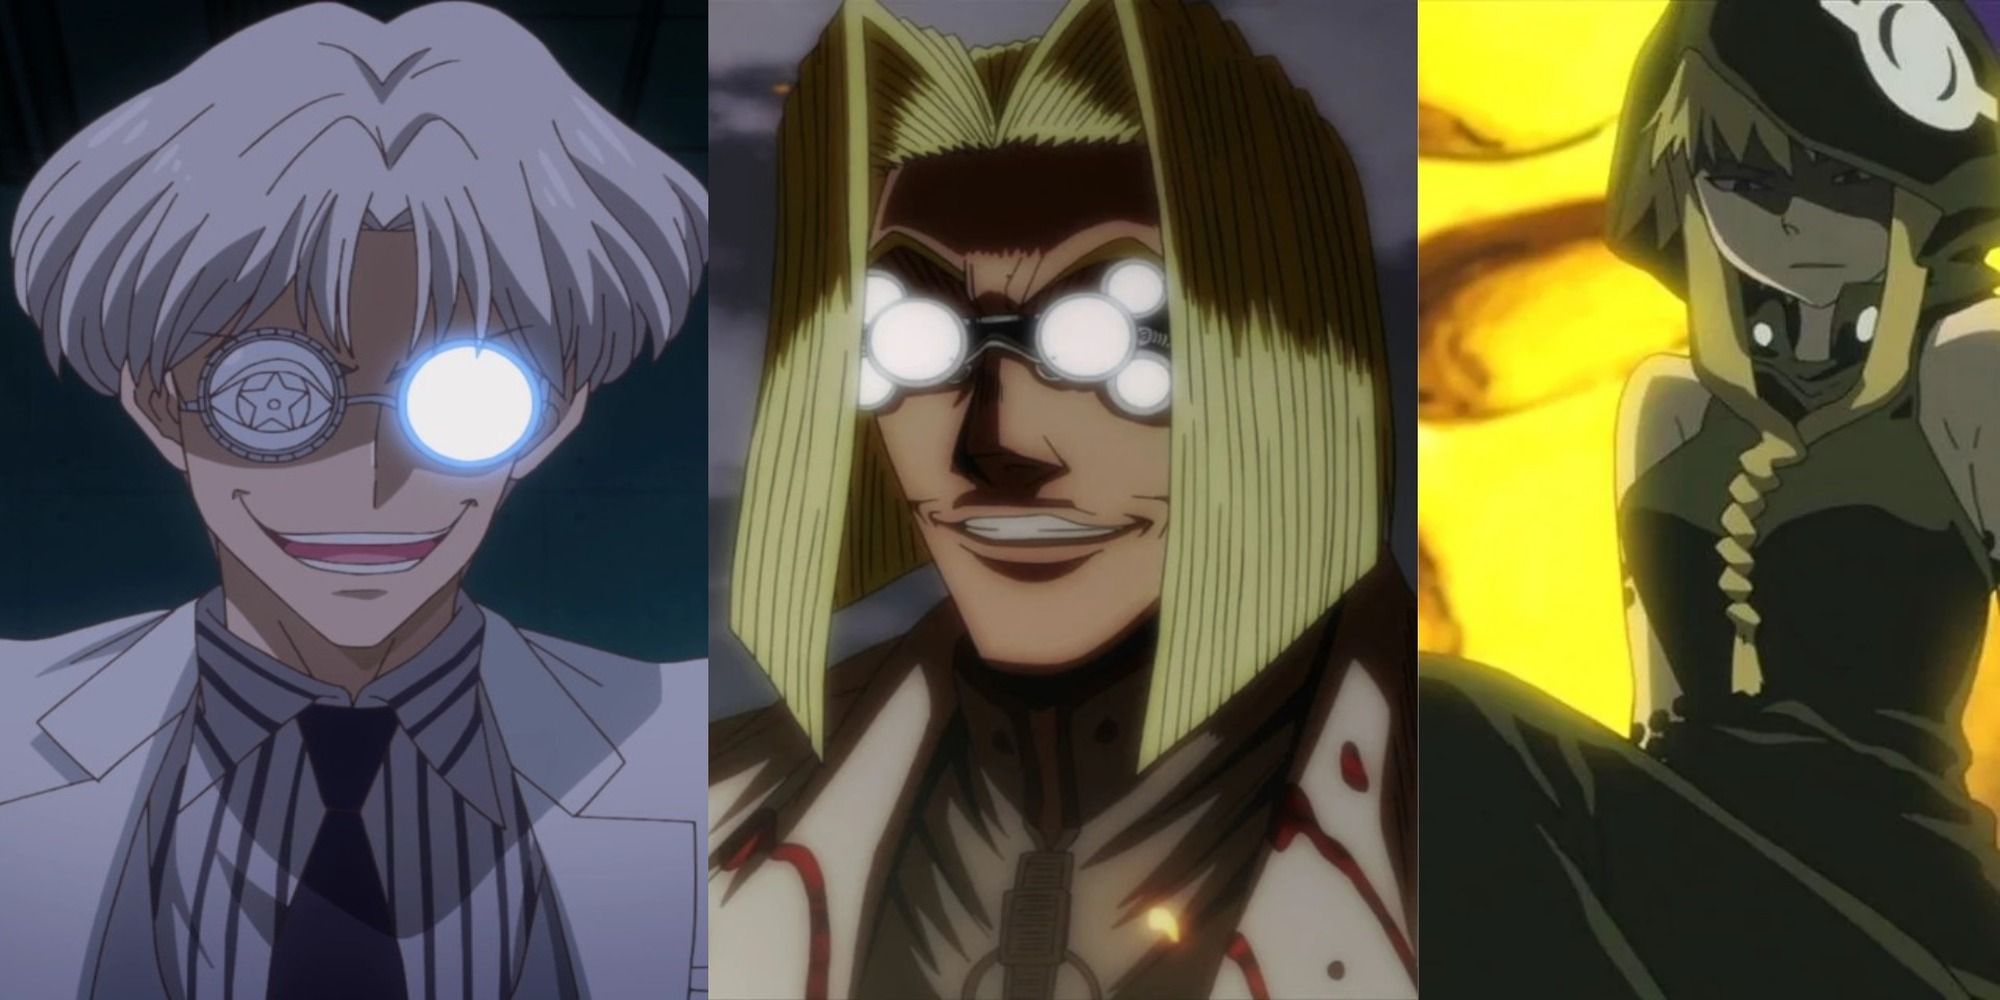 Who is the most talented scientist in anime? - Quora